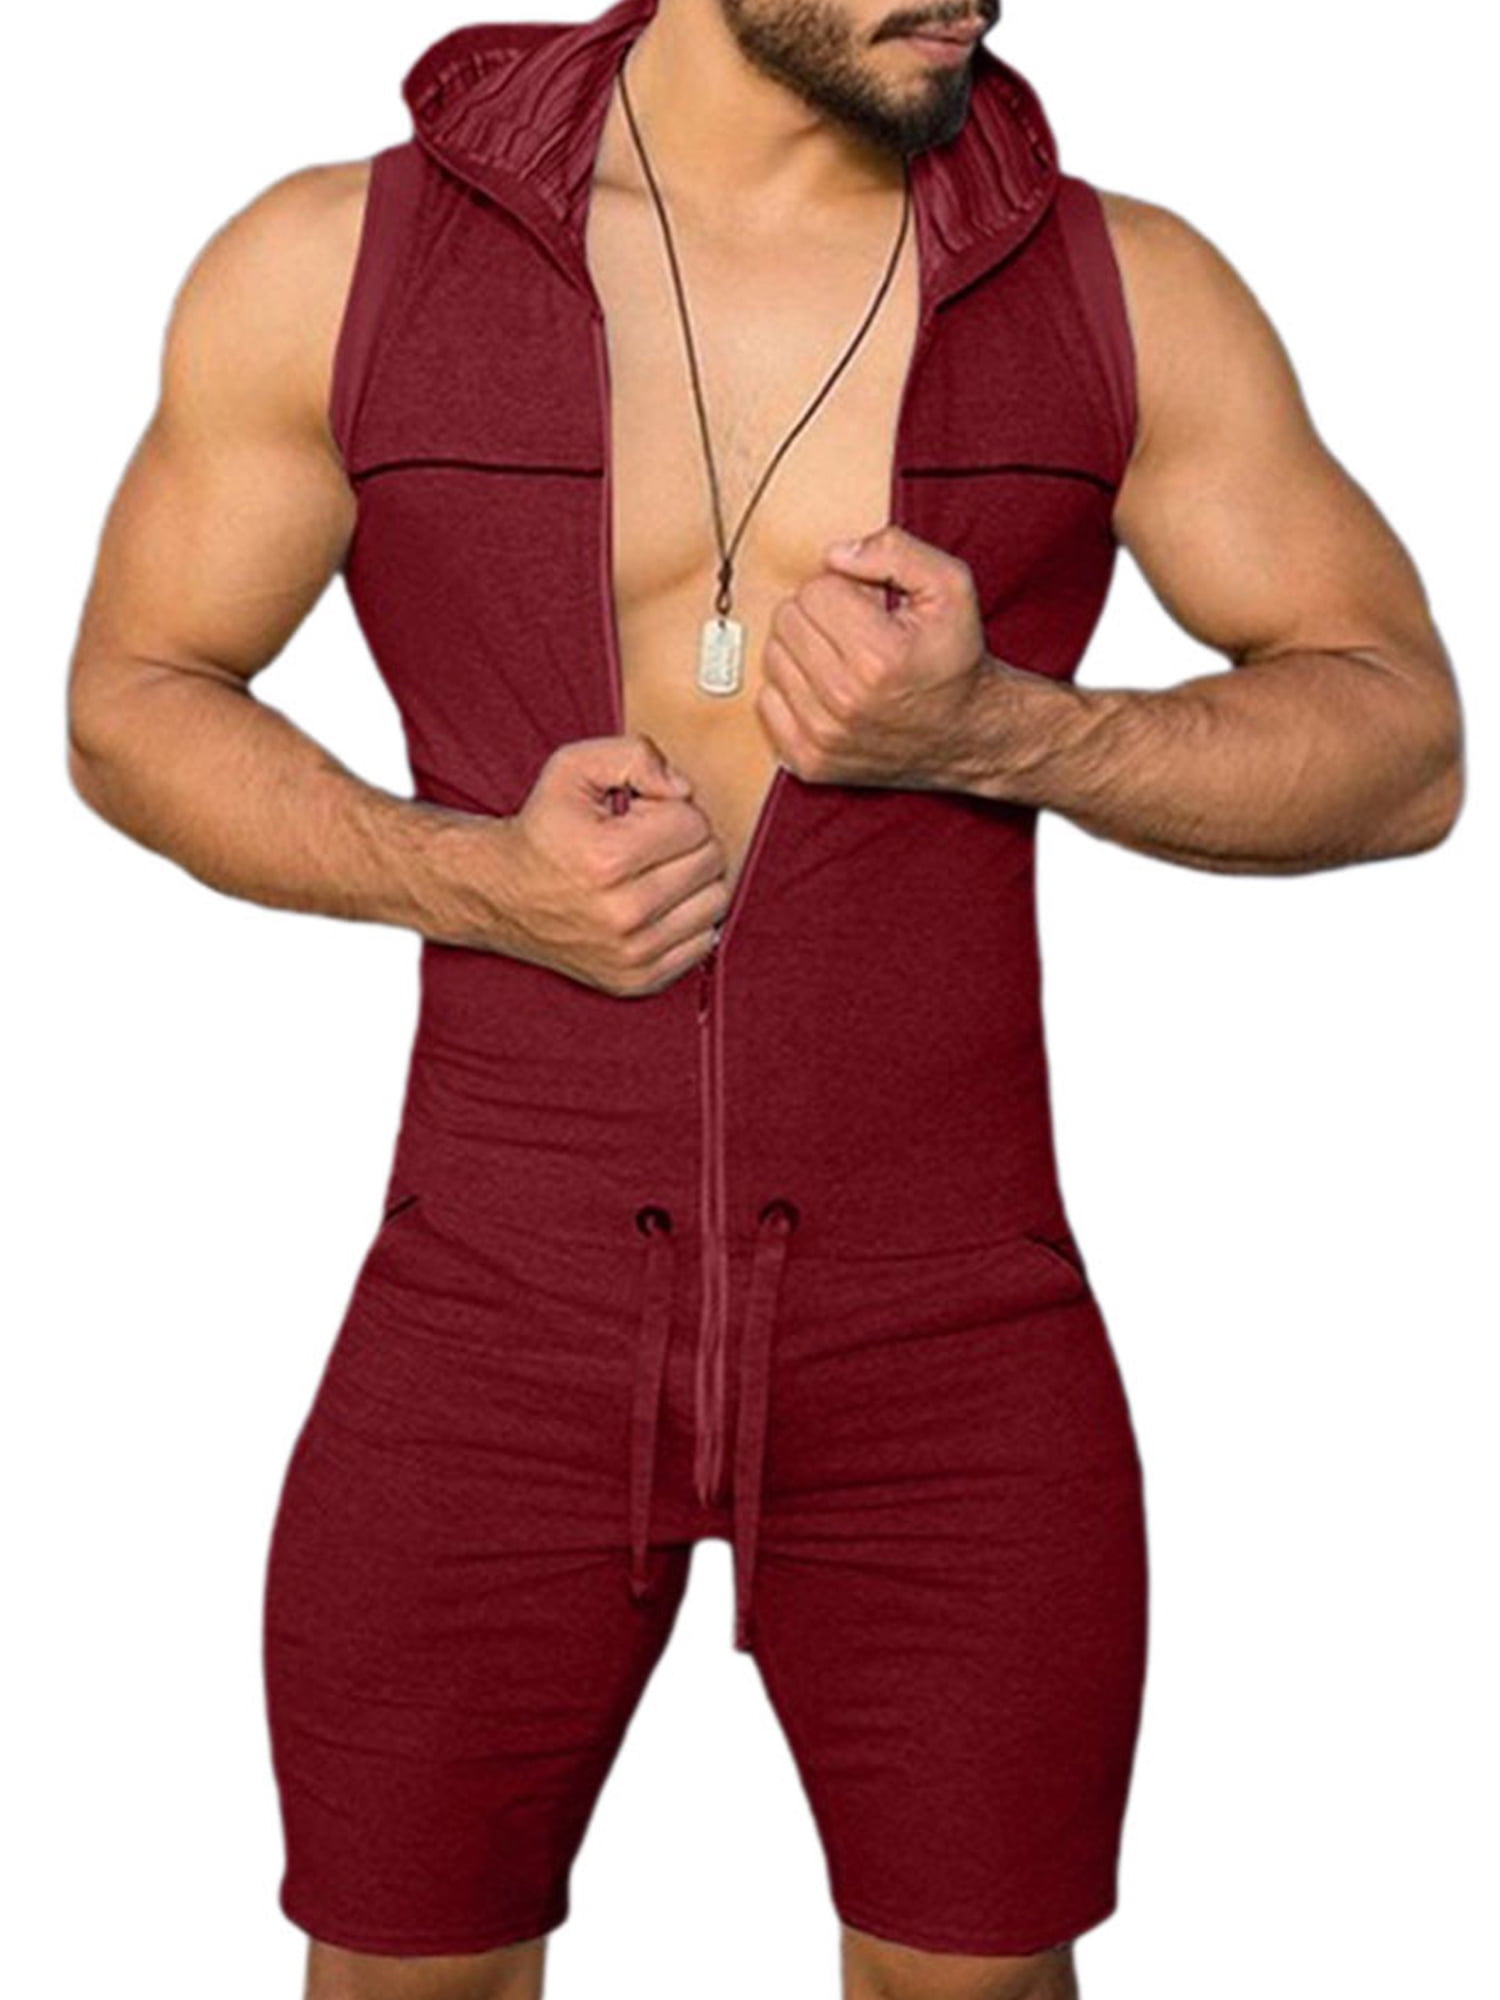 Details about   Men Sleeveless Casual Pants GYM Sport Jumpsuit Overalls All IN One Rompers Pants 